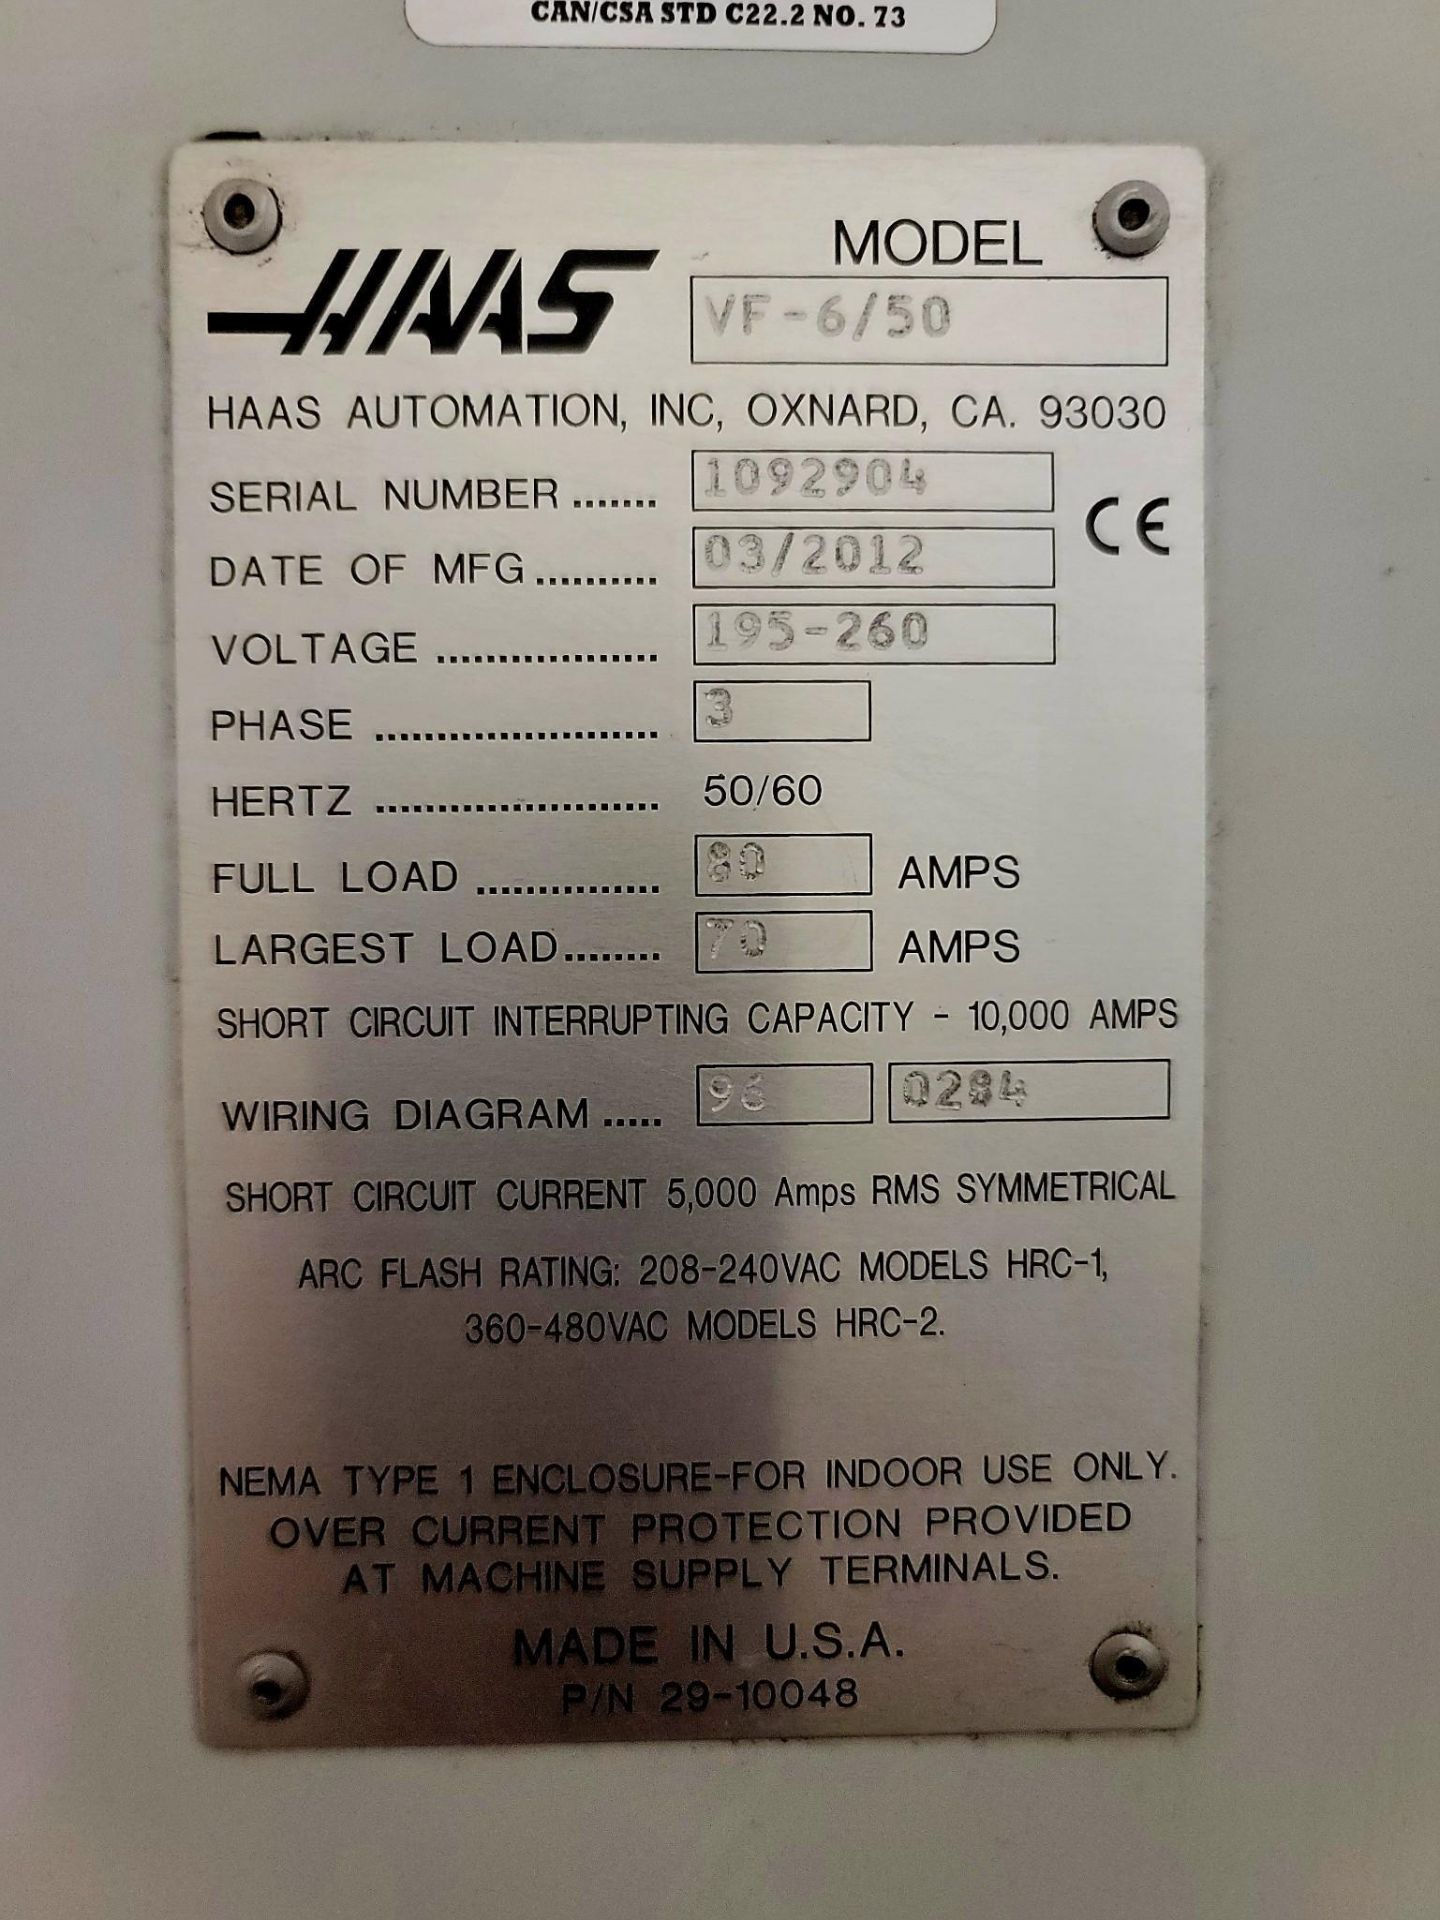 2012, Haas VF-6/50 CNC Vertical Machining Center - Image 34 of 36